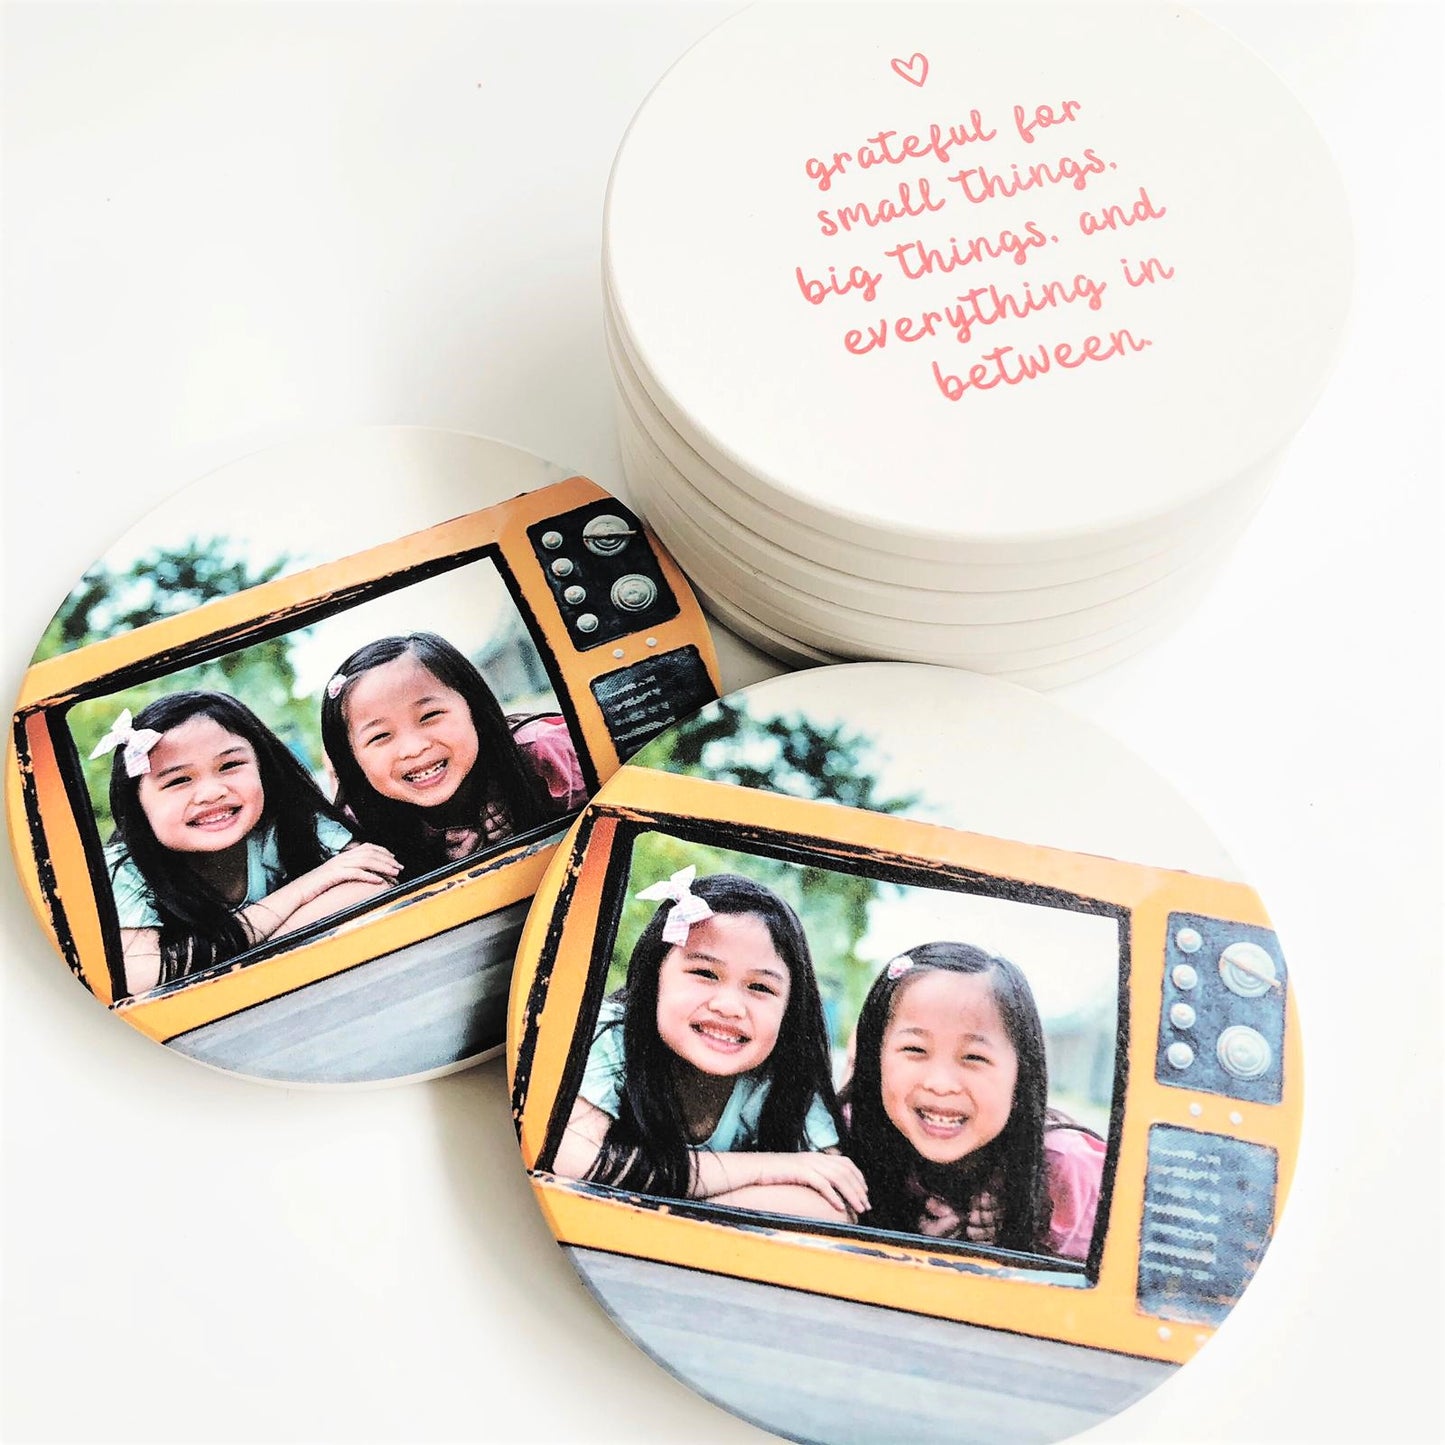 Personalised Ceramic Coaster Photo Coaster Gift Coasters Print Your Own Design